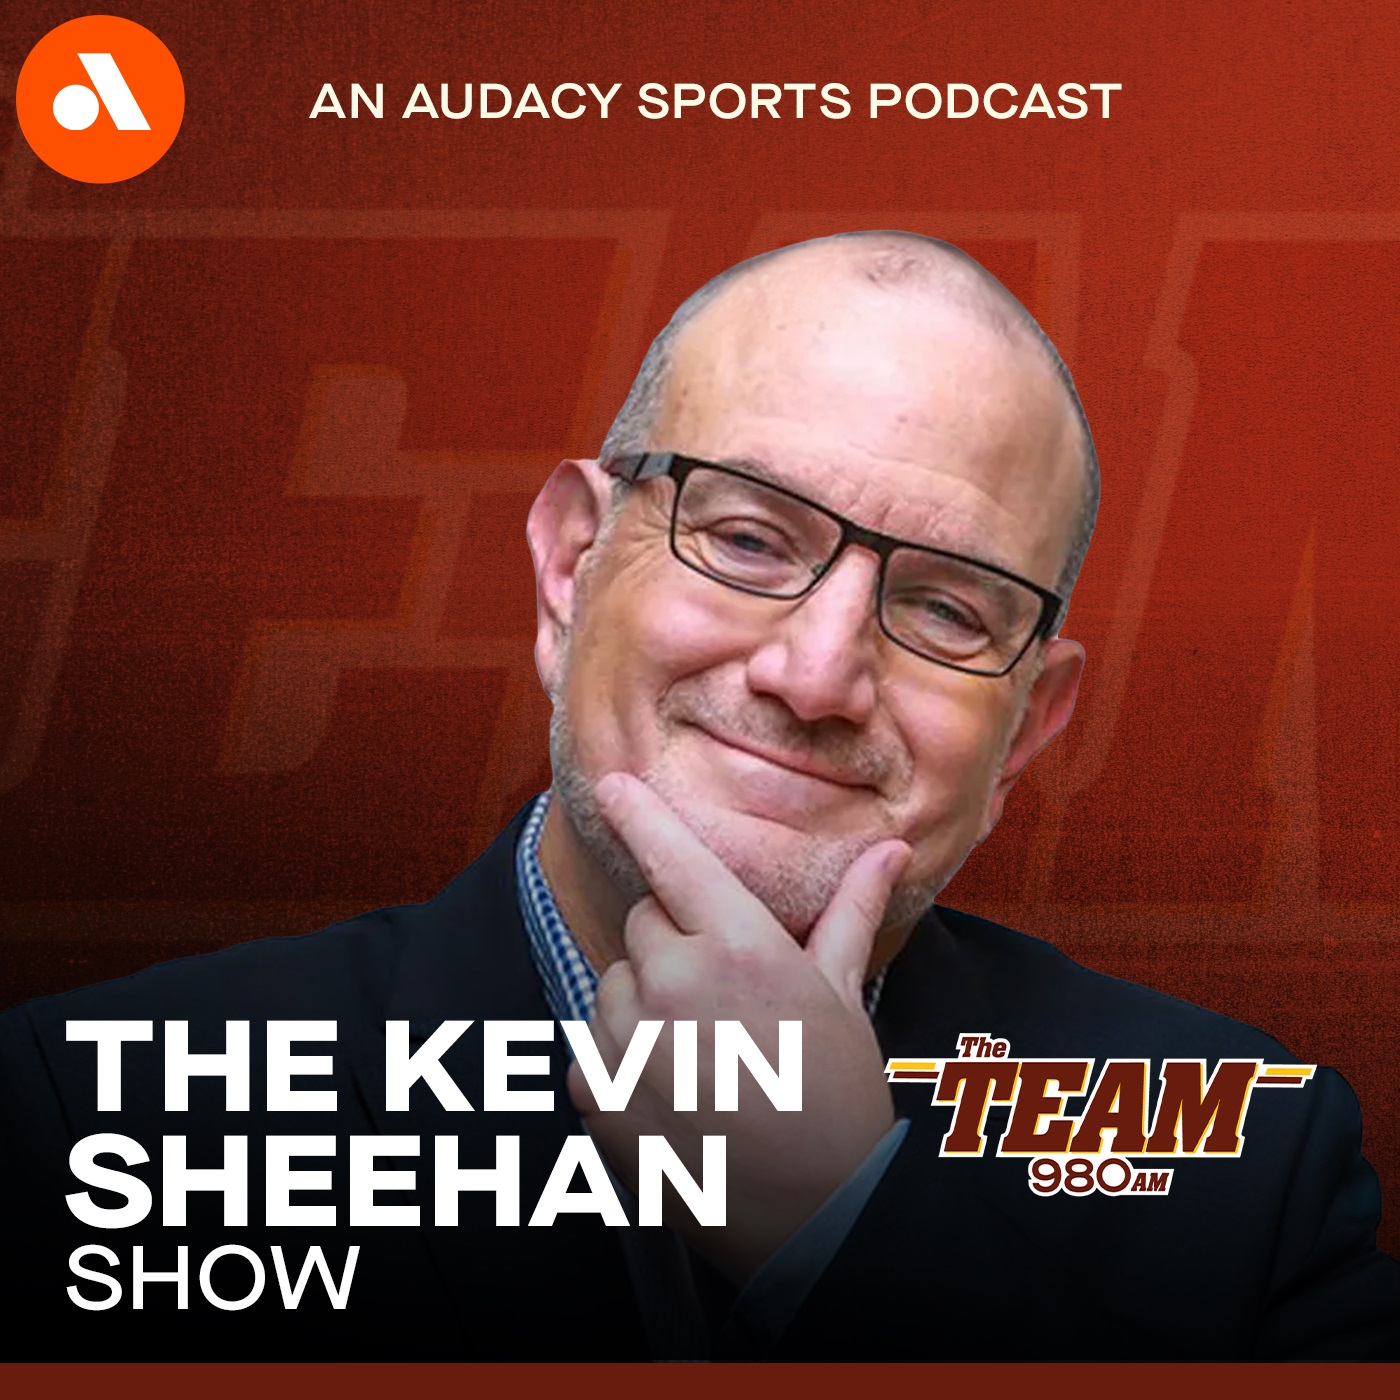 Smokin' Al Koken joins the show and Doc talks about the draft and college football too